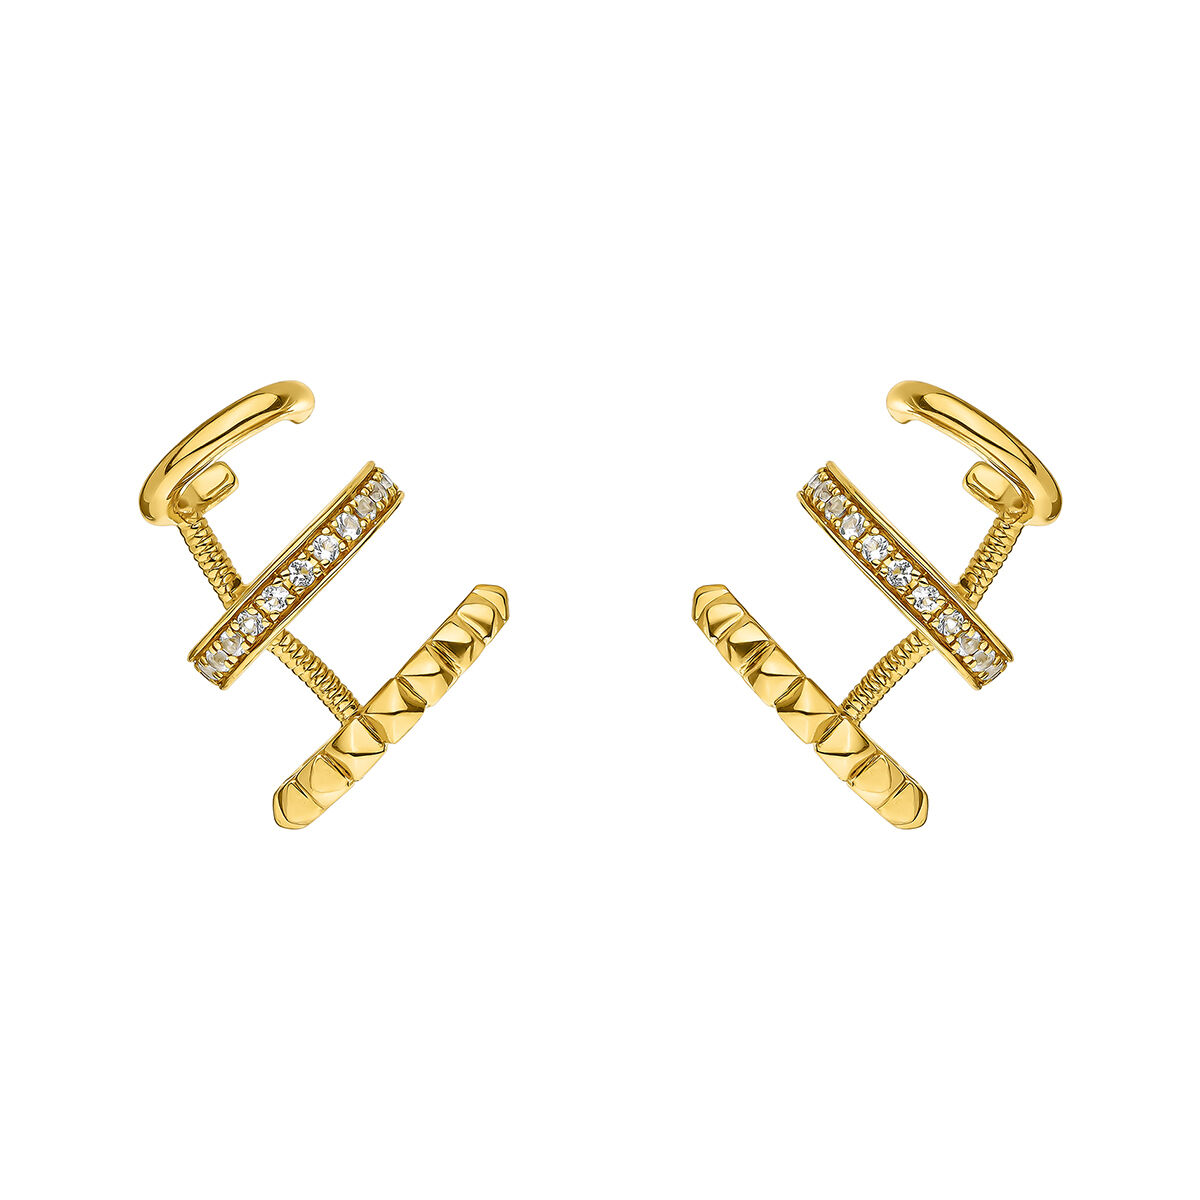 Triple climber hoop earrings in 18ct yellow gold-plated silver, J04908-02-WT, hi-res